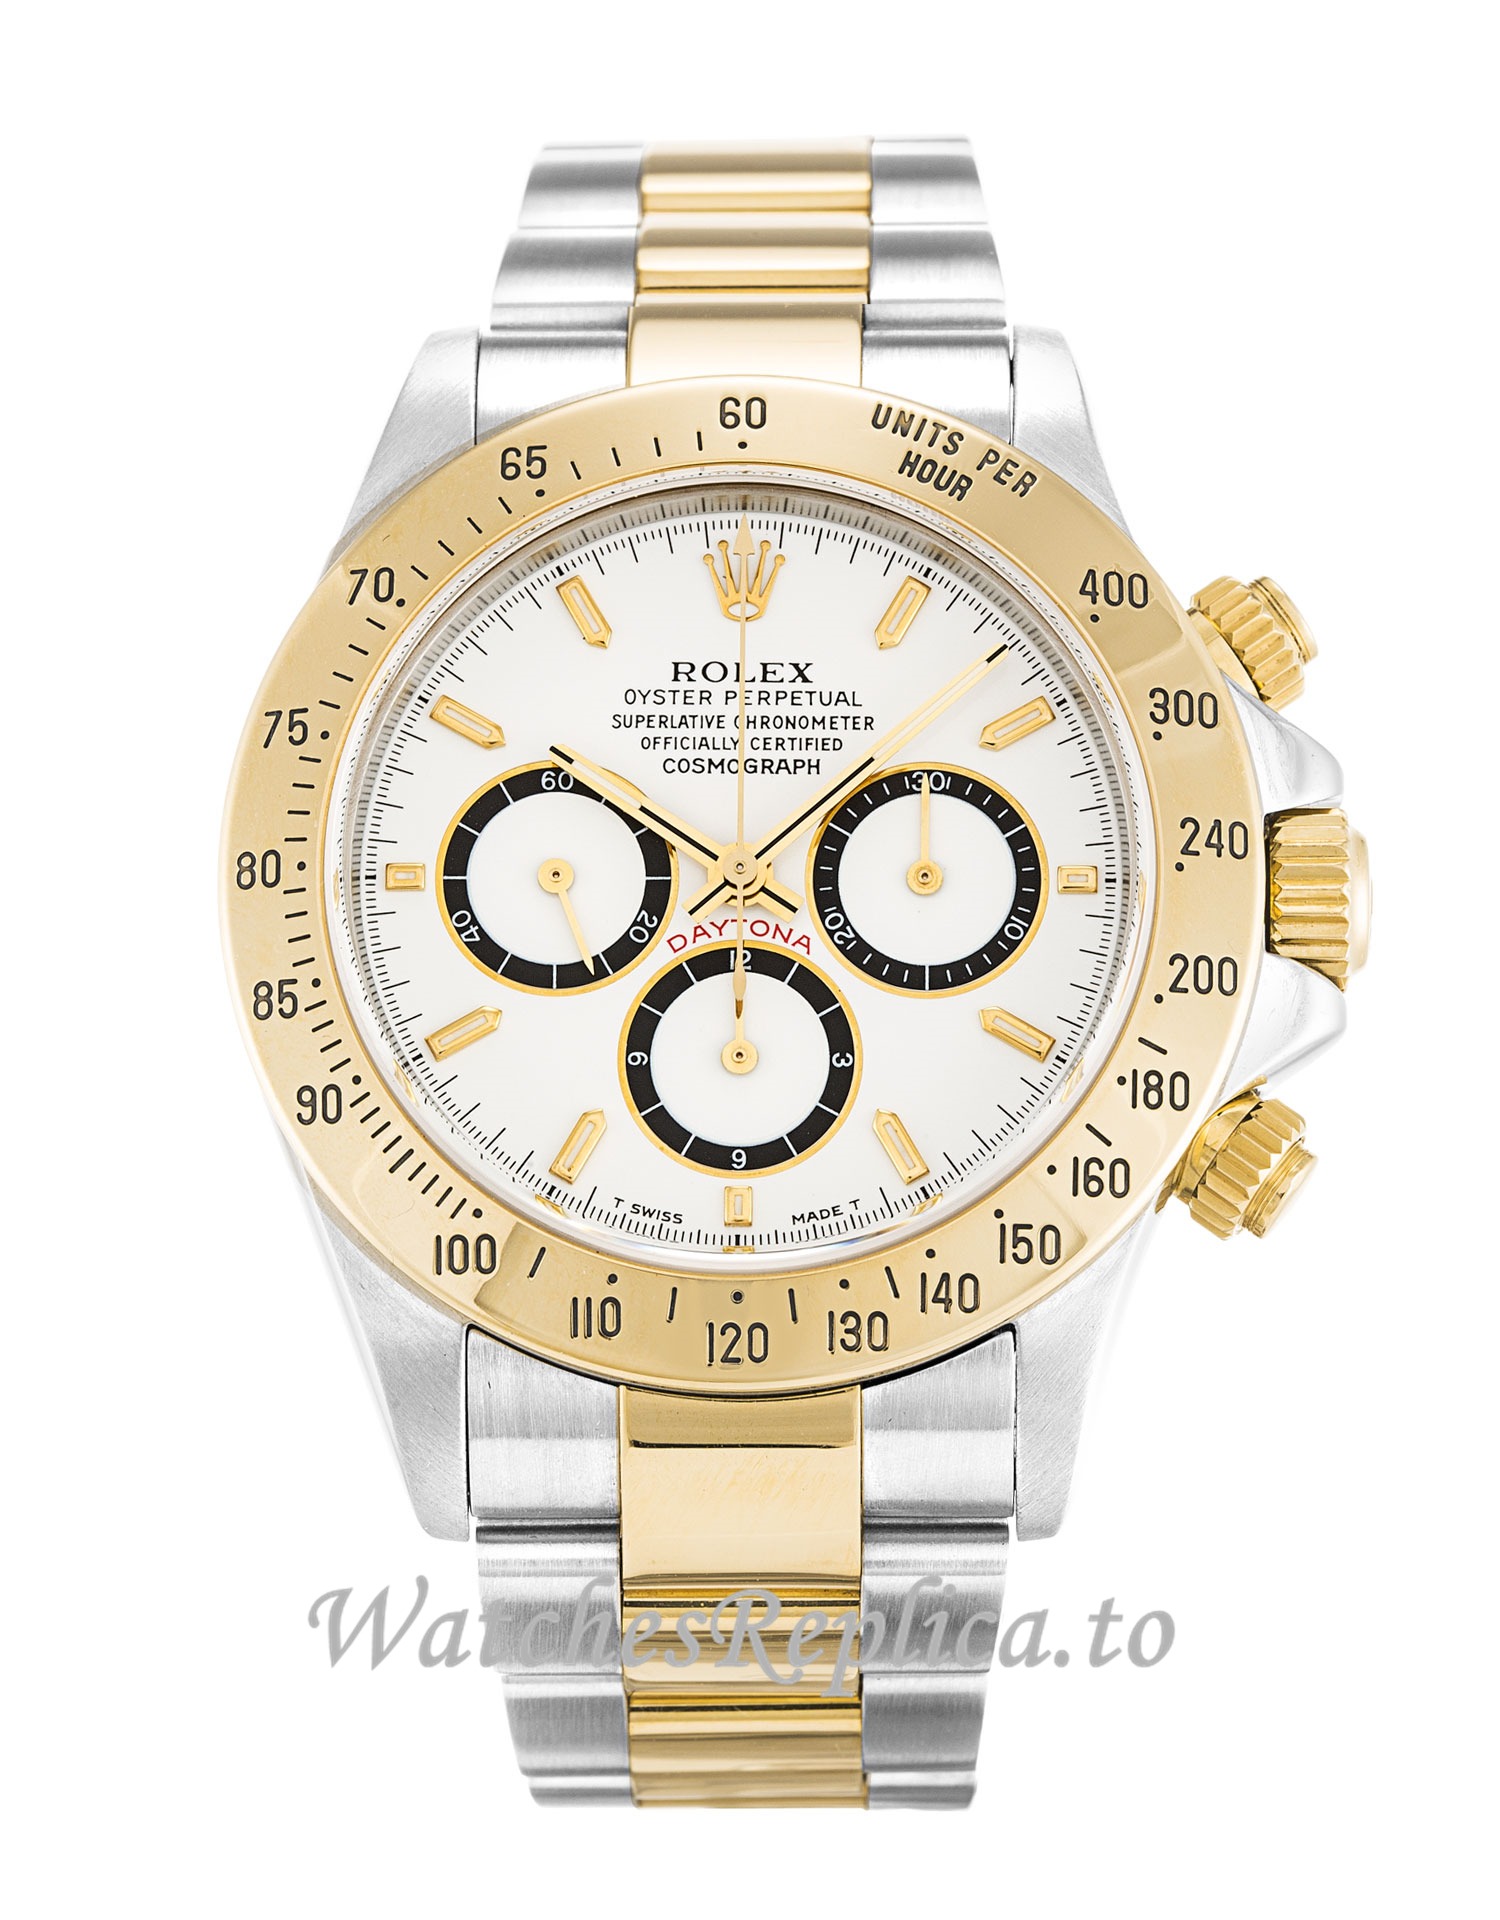 what is the price of rolex